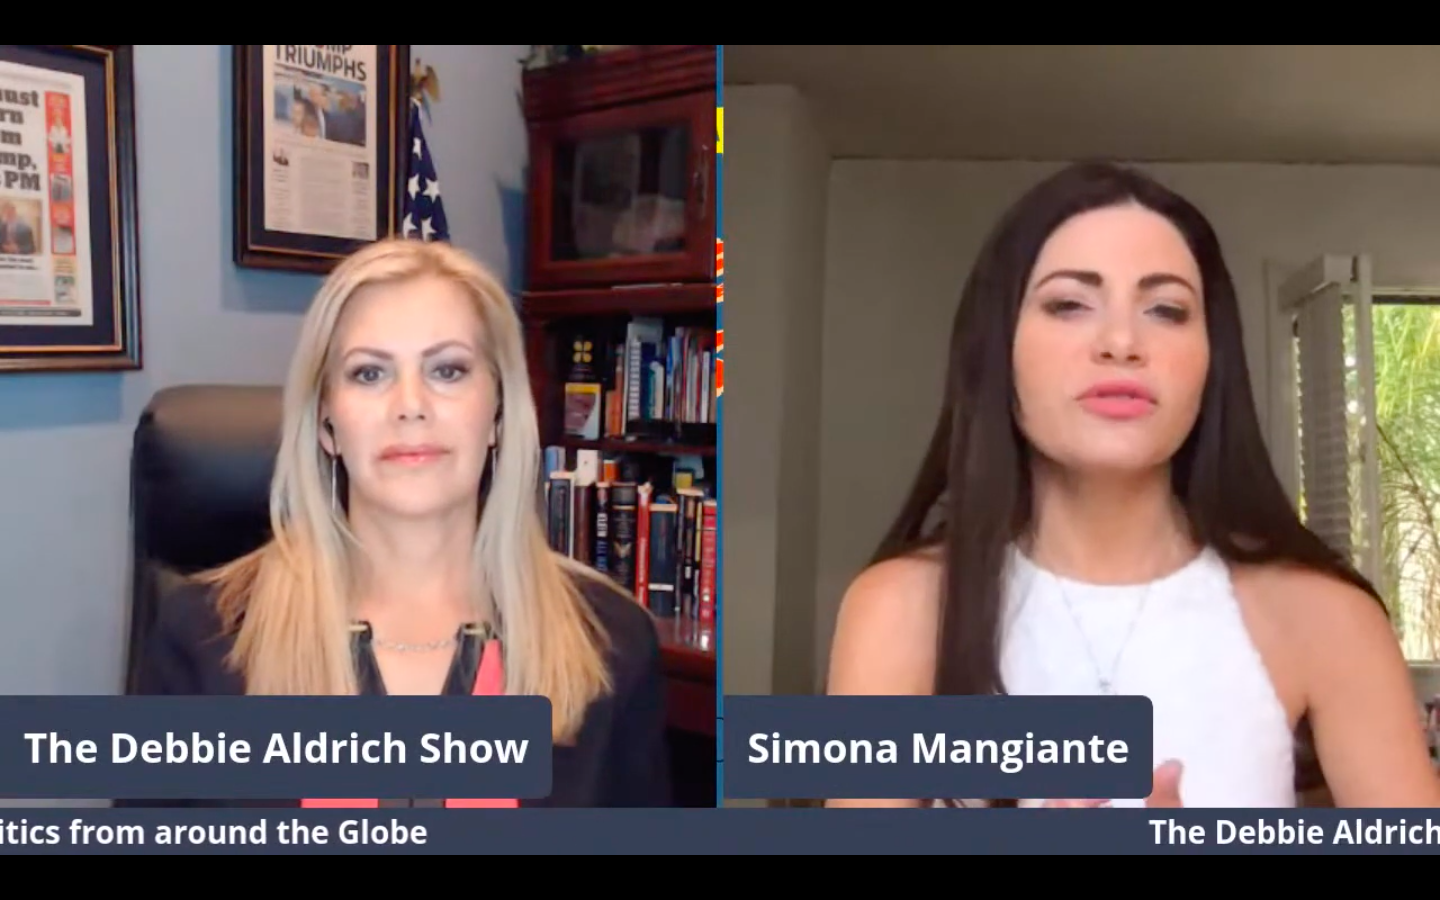 Debbie Aldrich And Simona Manigiante Papadopoulos..."We Were Scared for Our Lives"